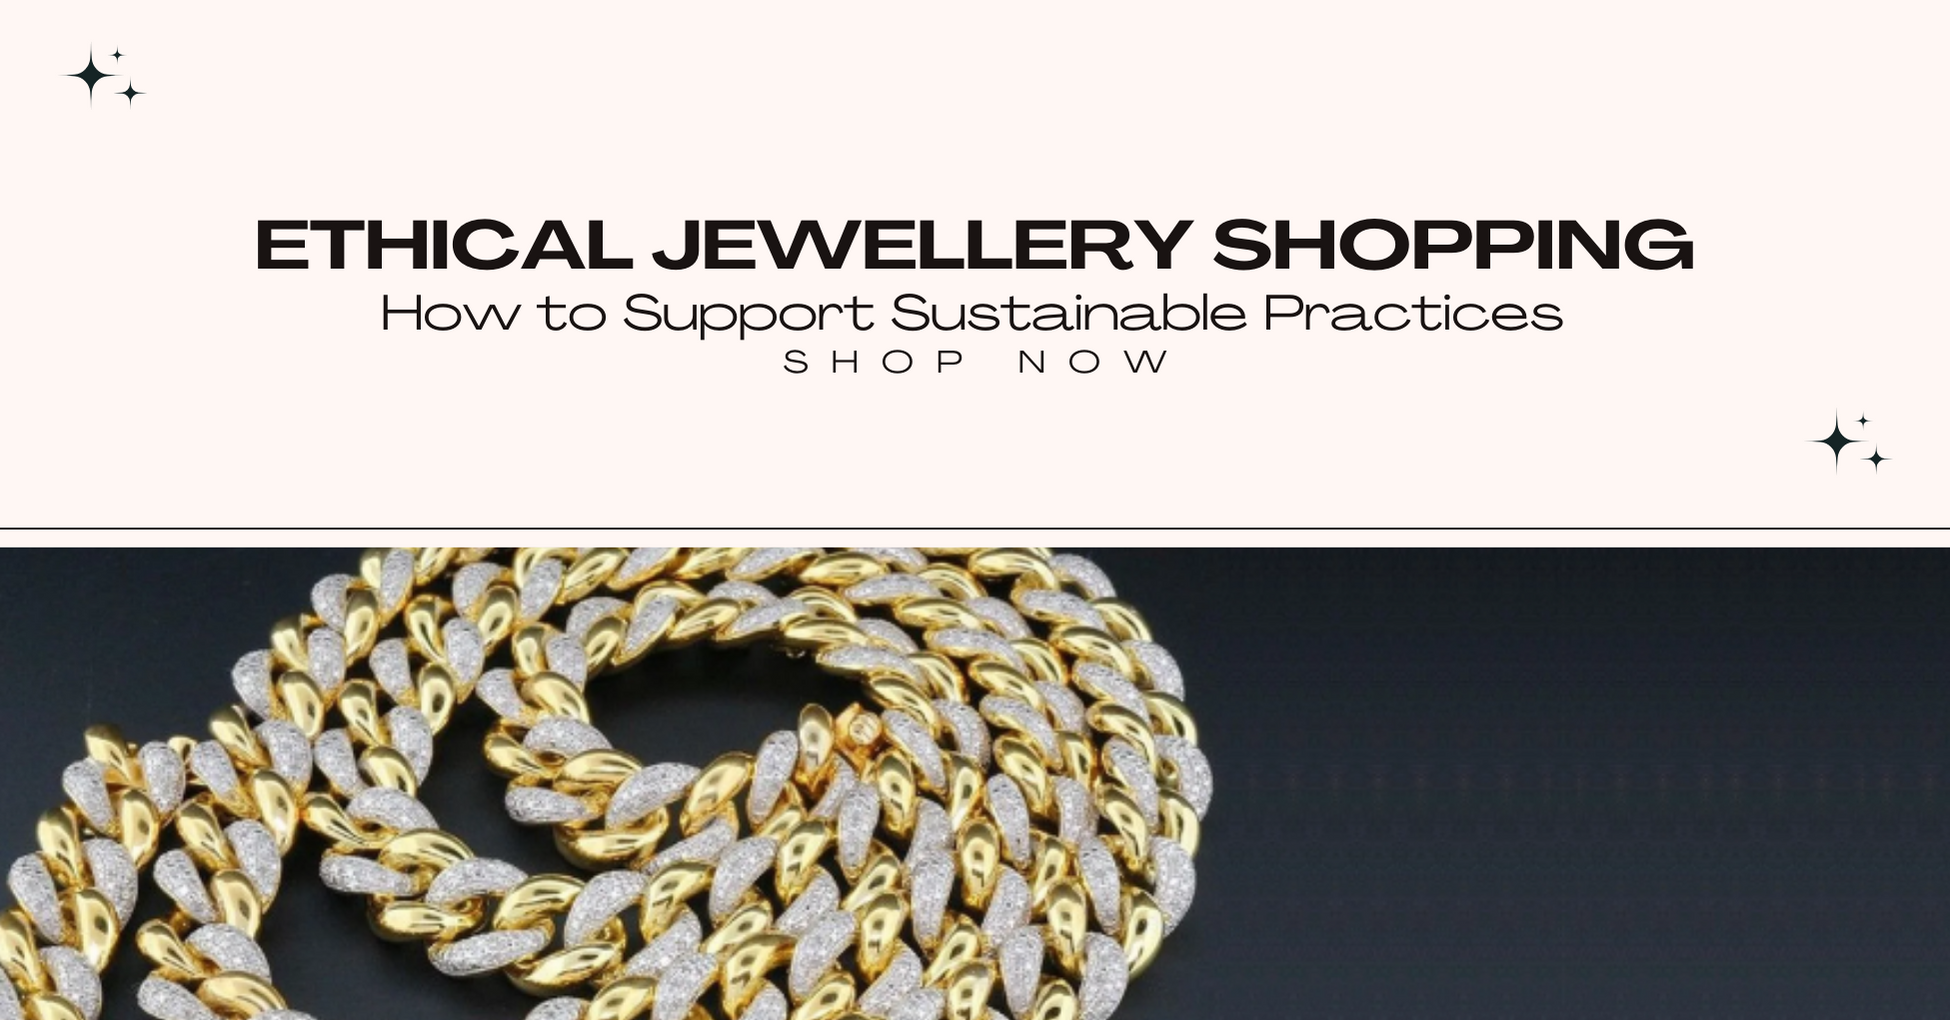 Ethical Jewellery Shopping: How to Support Sustainable Practices